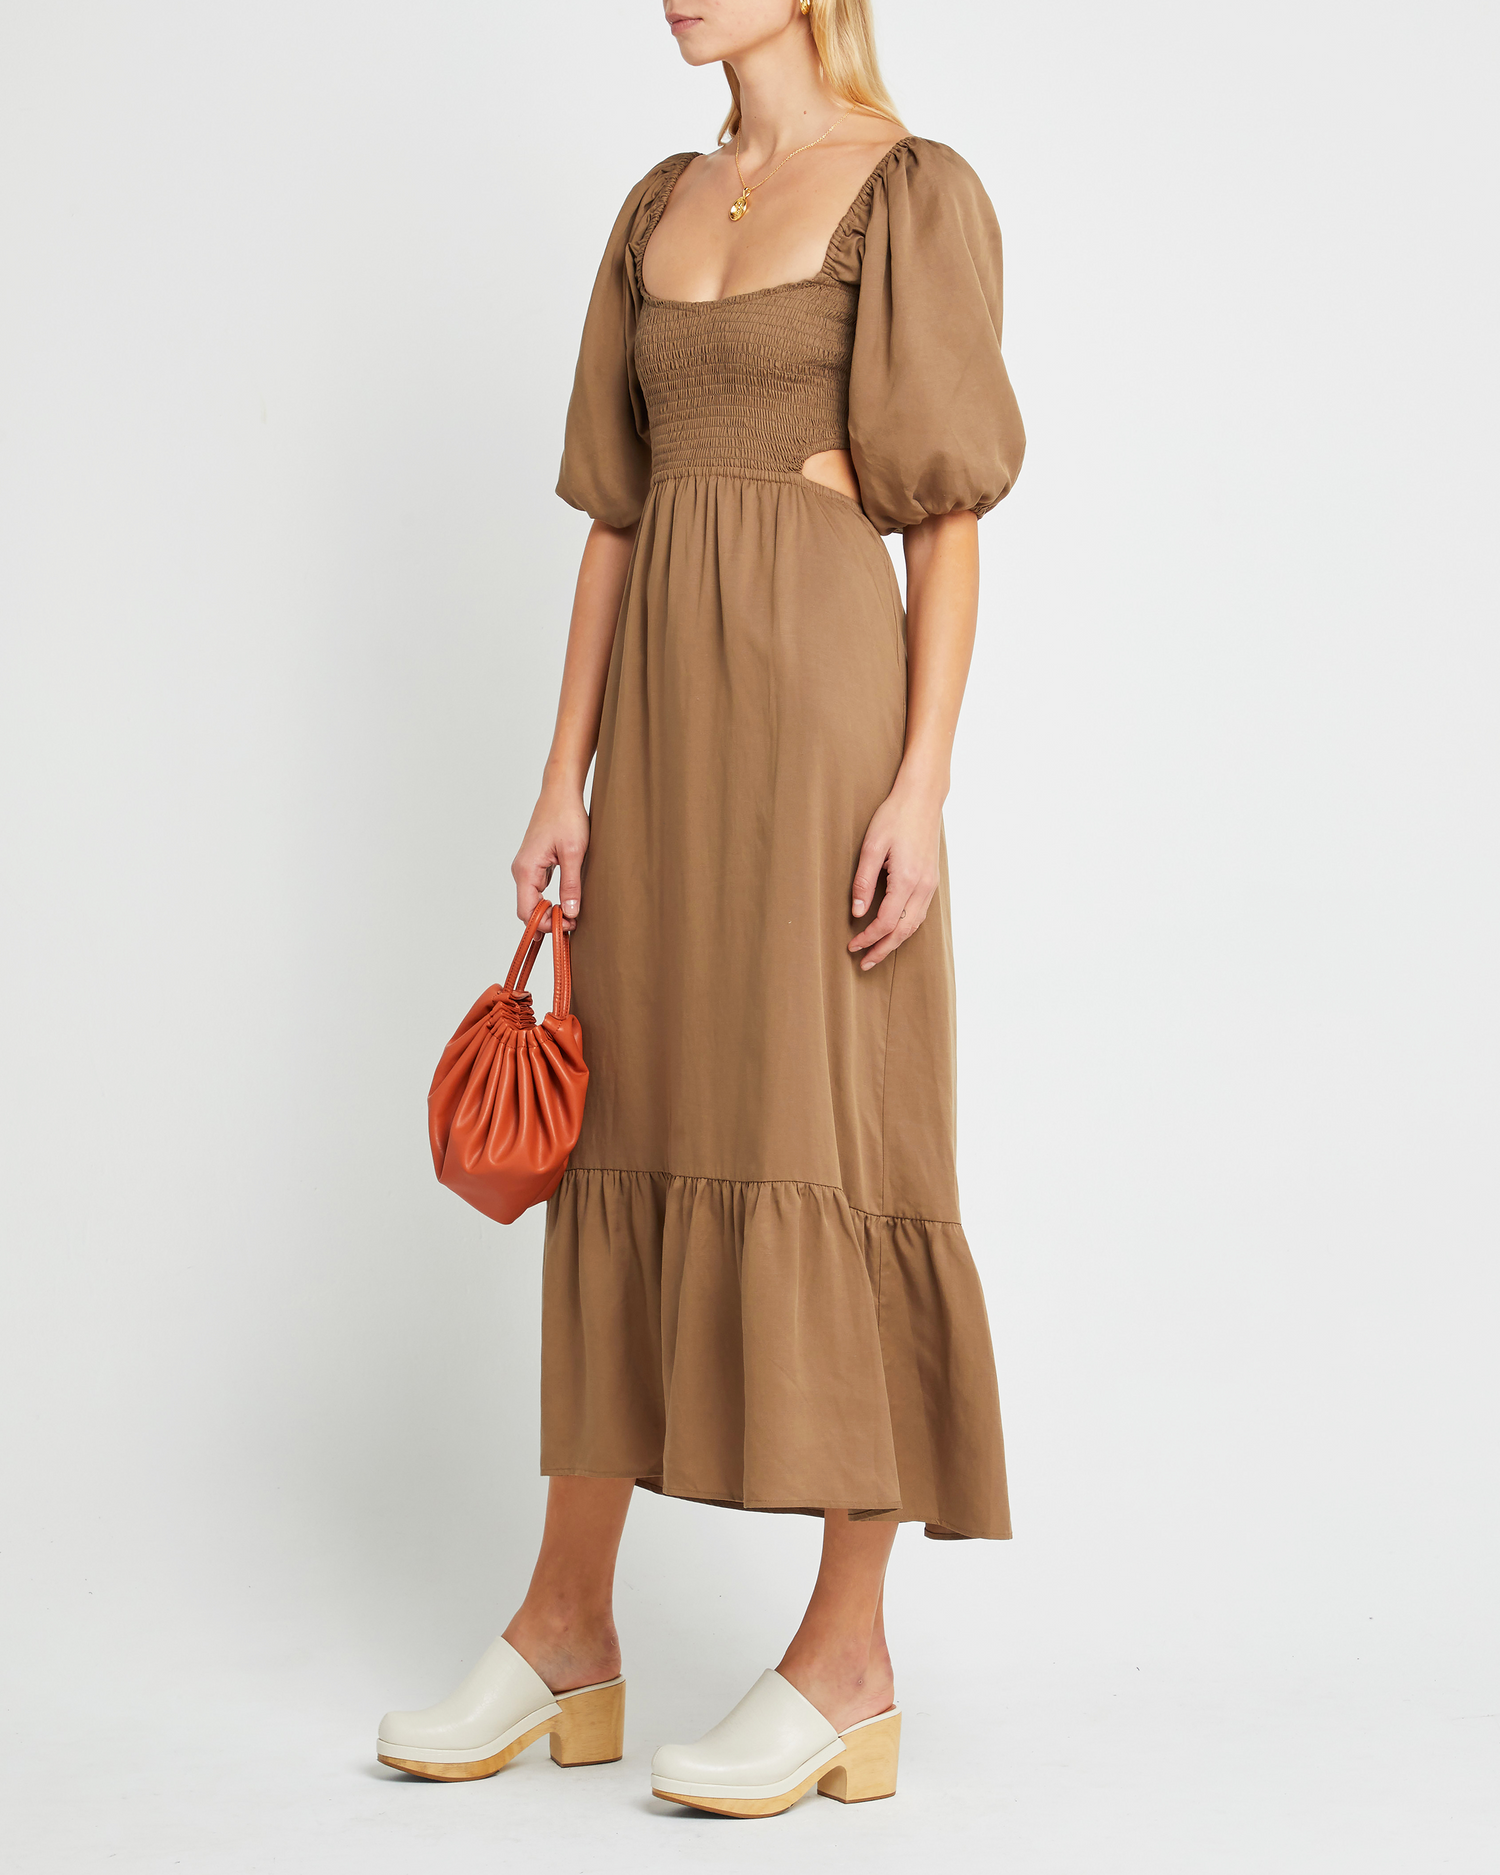 Third image of Leighton Dress, a  maxi dress, open back, cut outs, puff sleeves, short sleeves